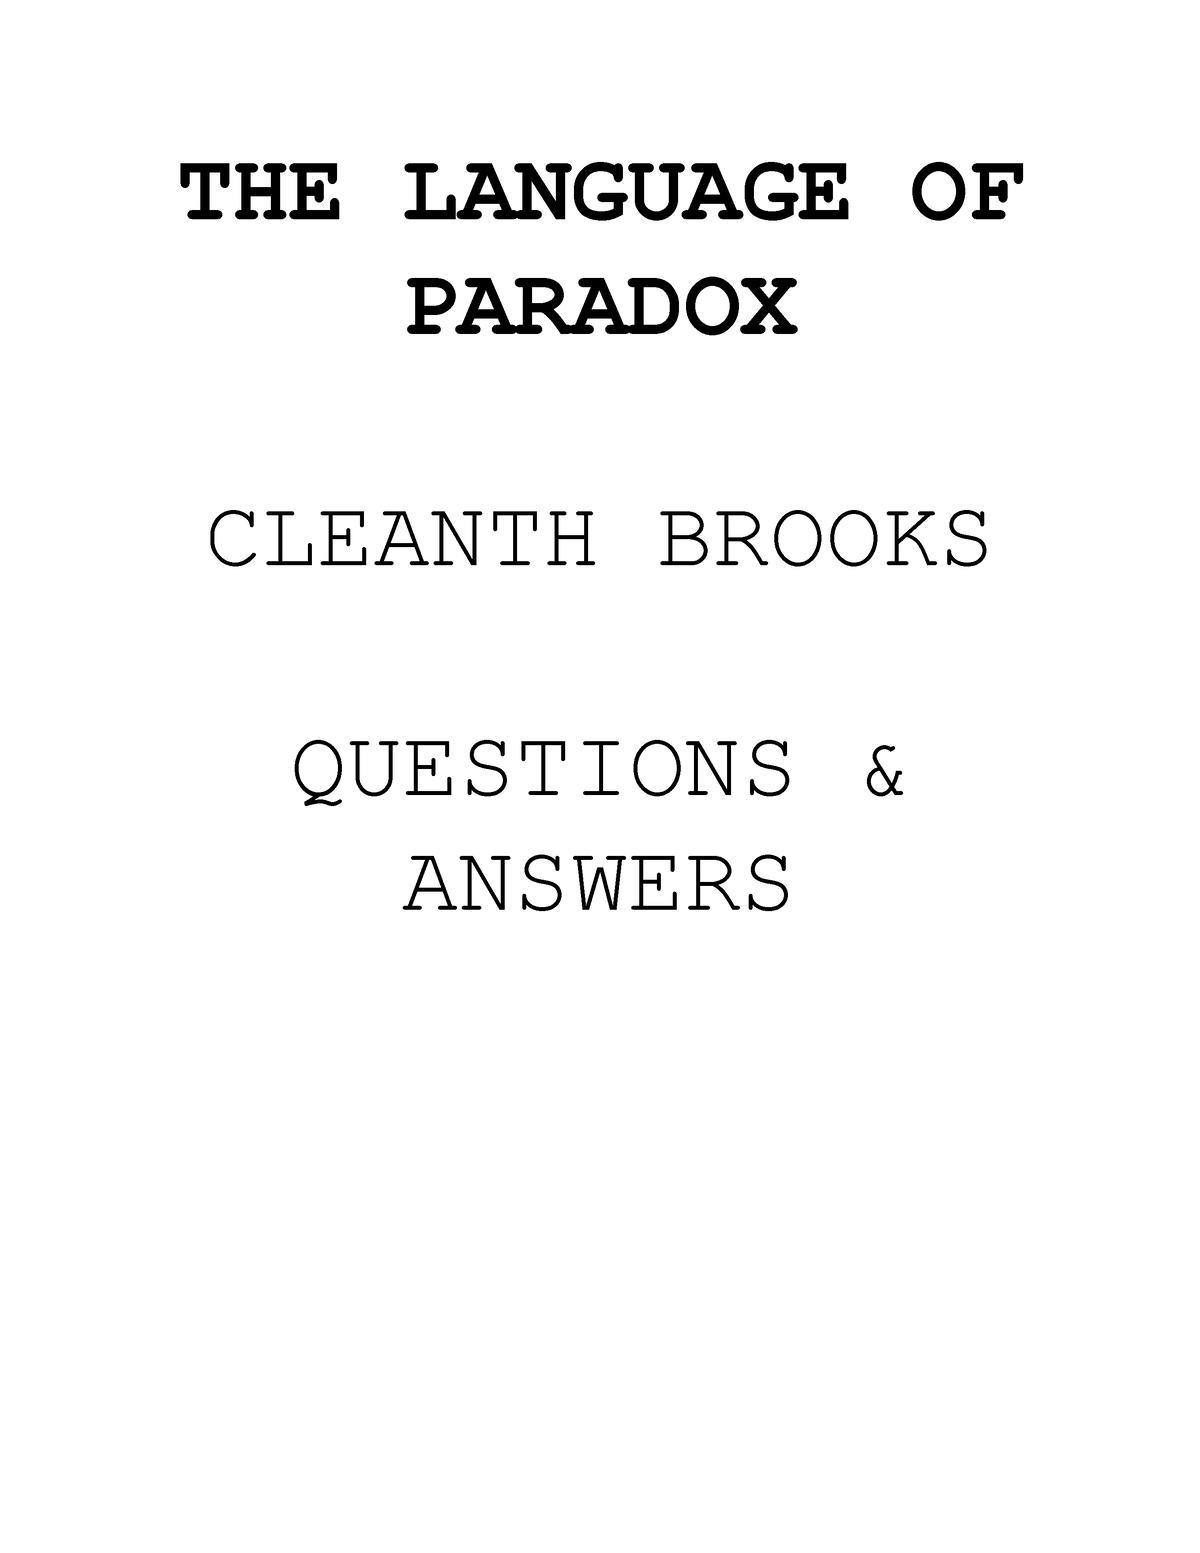 the-language-of-paradox-questions-the-language-of-paradox-cleanth